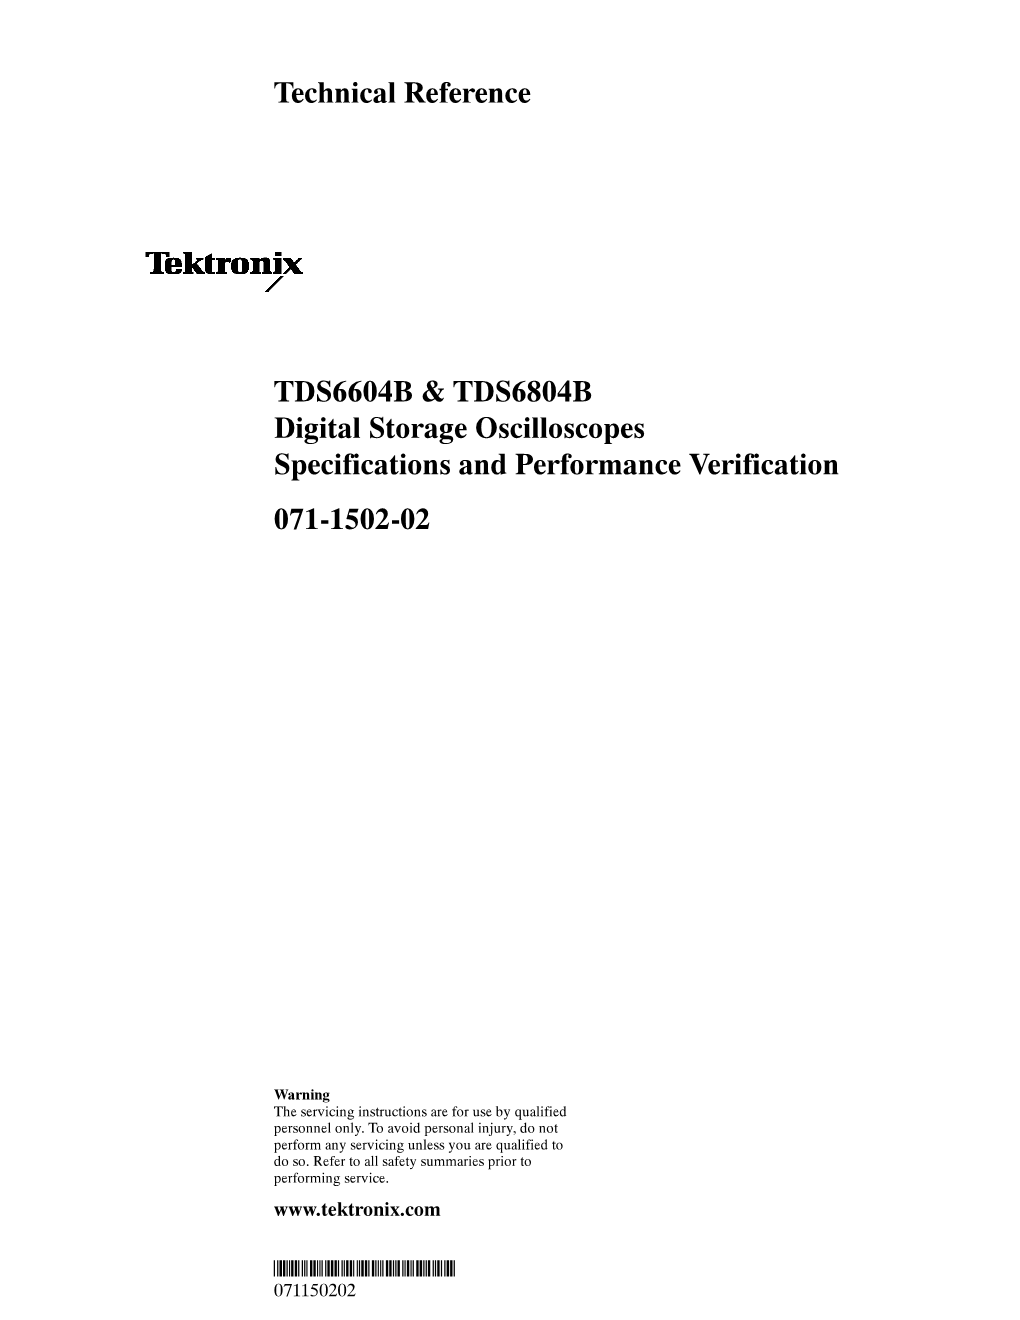 TDS6604B & TDS6804B Digital Storage Oscilloscopes Specifications and Performance Verification Technical Reference